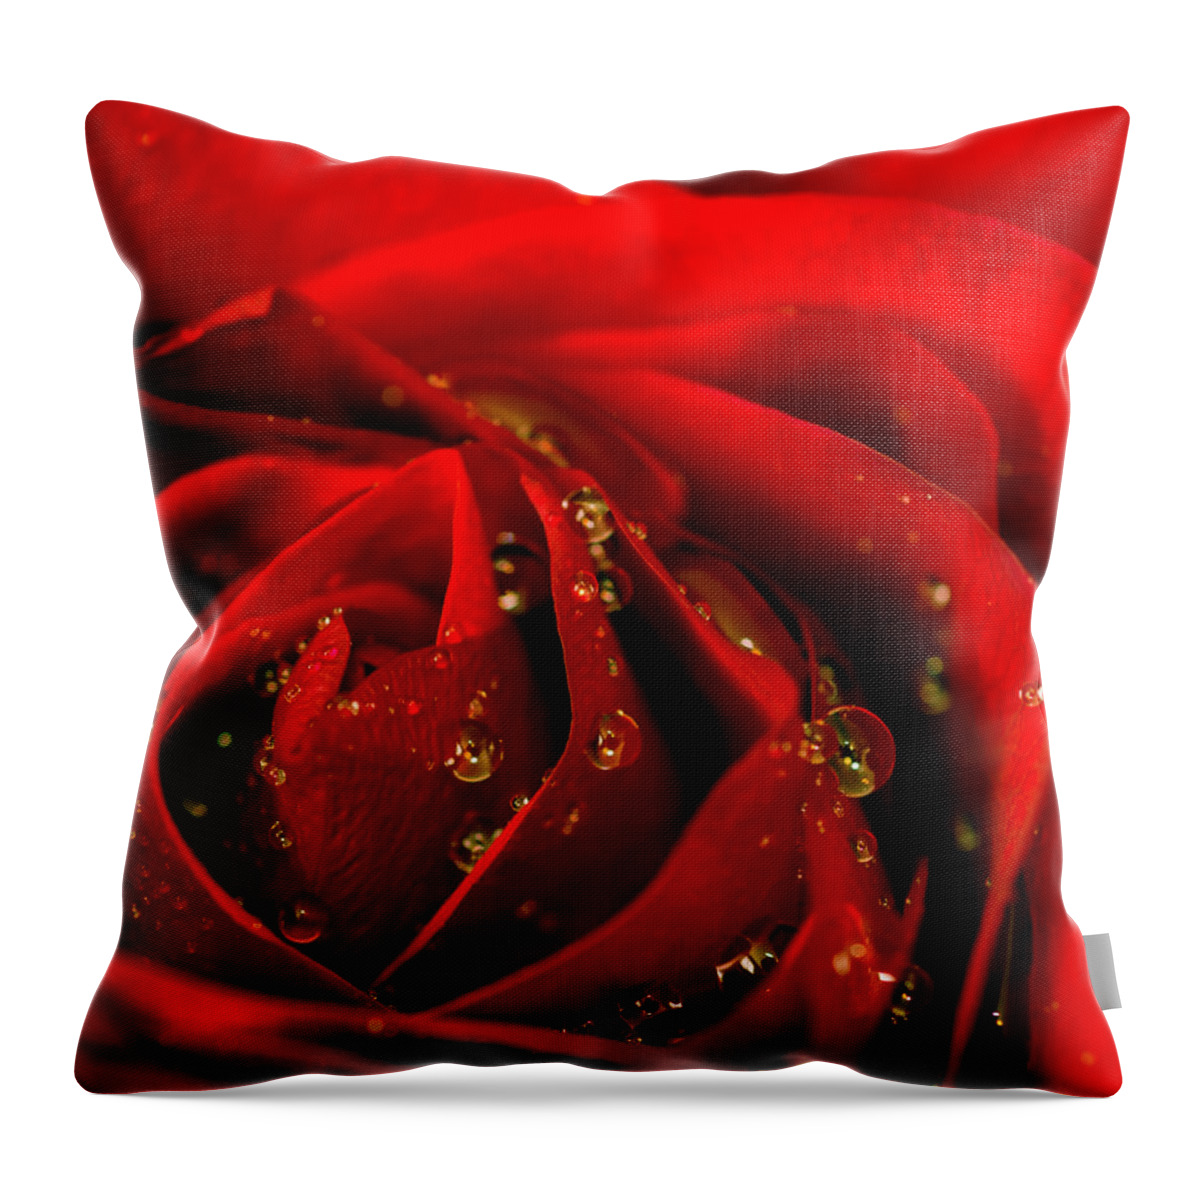 Rose Throw Pillow featuring the photograph Red Rose 2 by Keith Smith